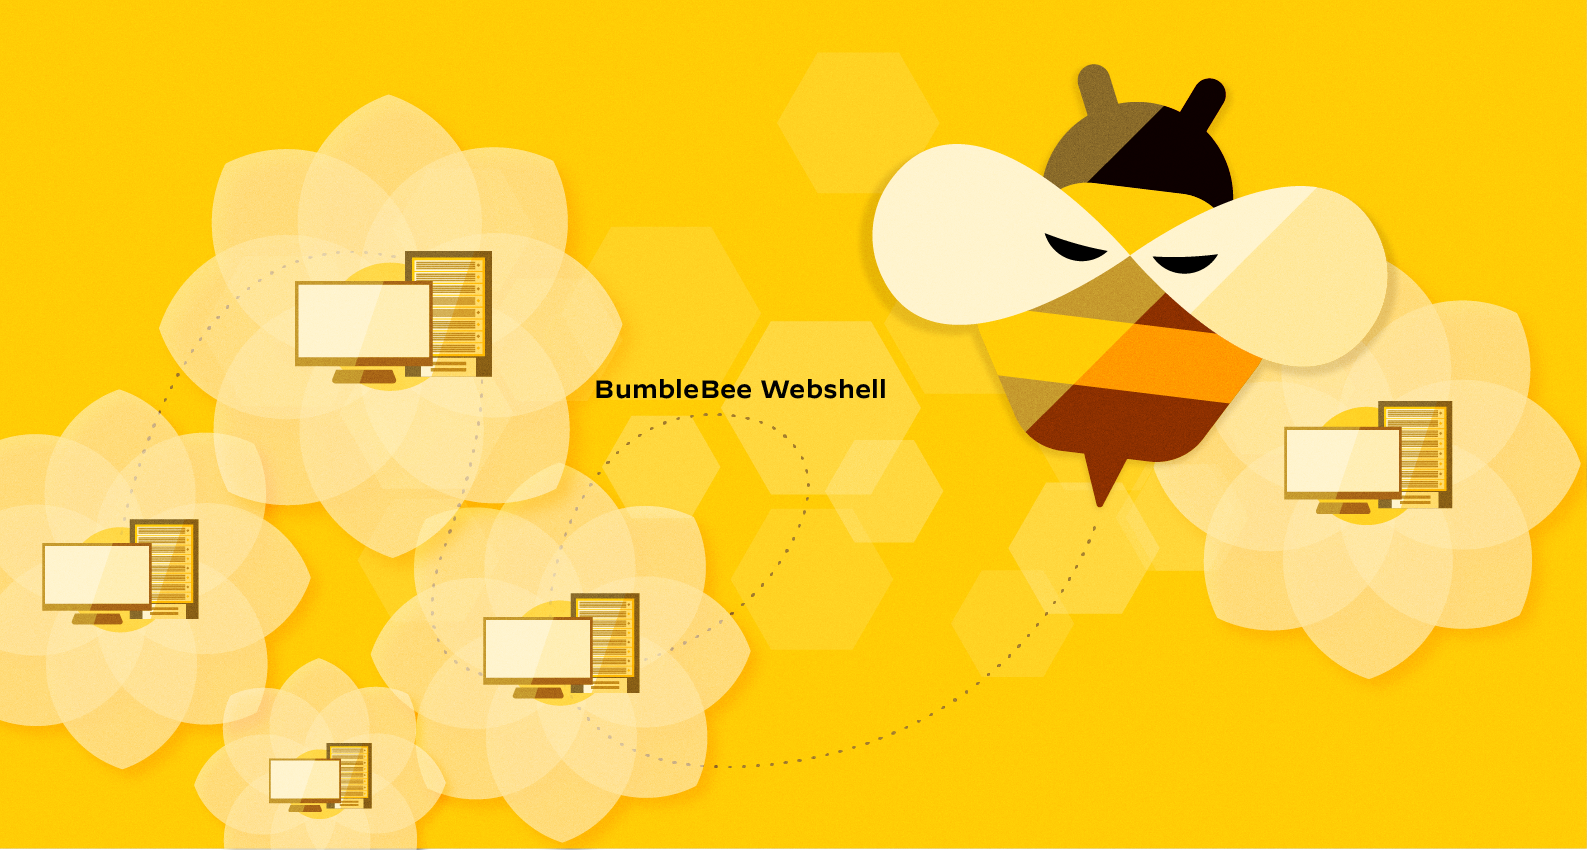 The BumbleBee webshell, conceptually illustrated here, was discovered as part of an investigation of the continued xHunt campaign.